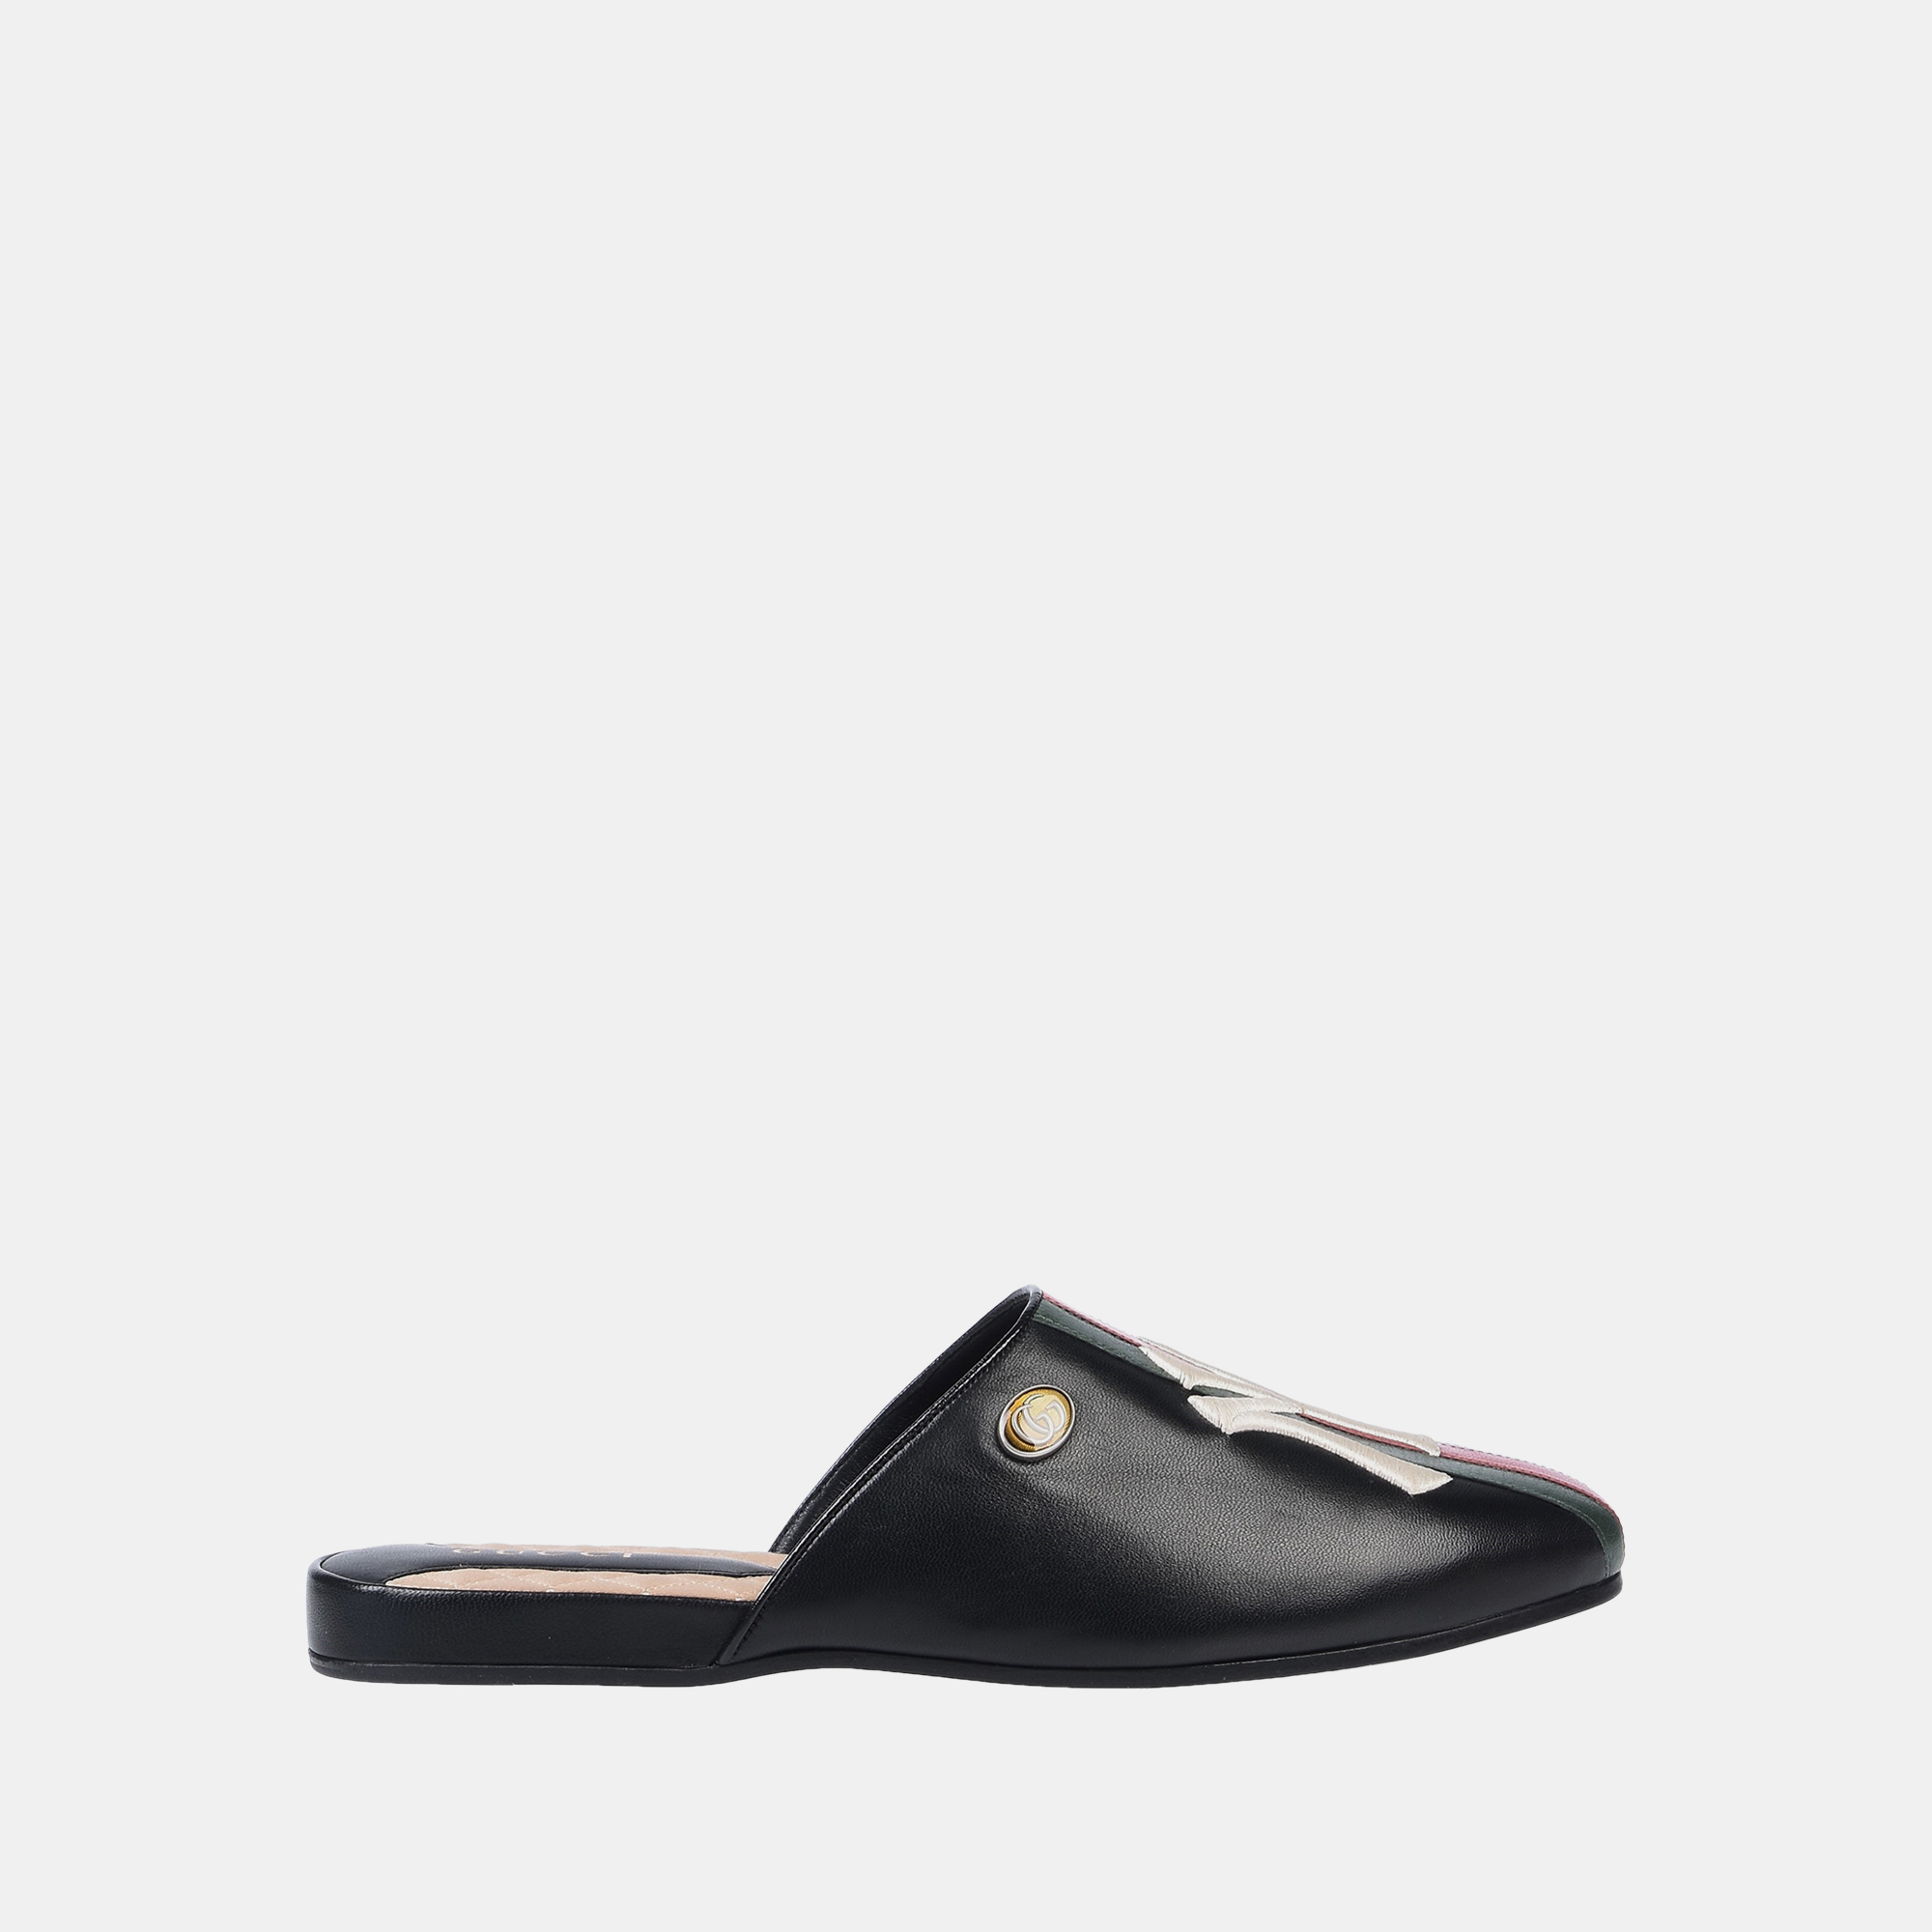 Gucci leather ny mules 43.5